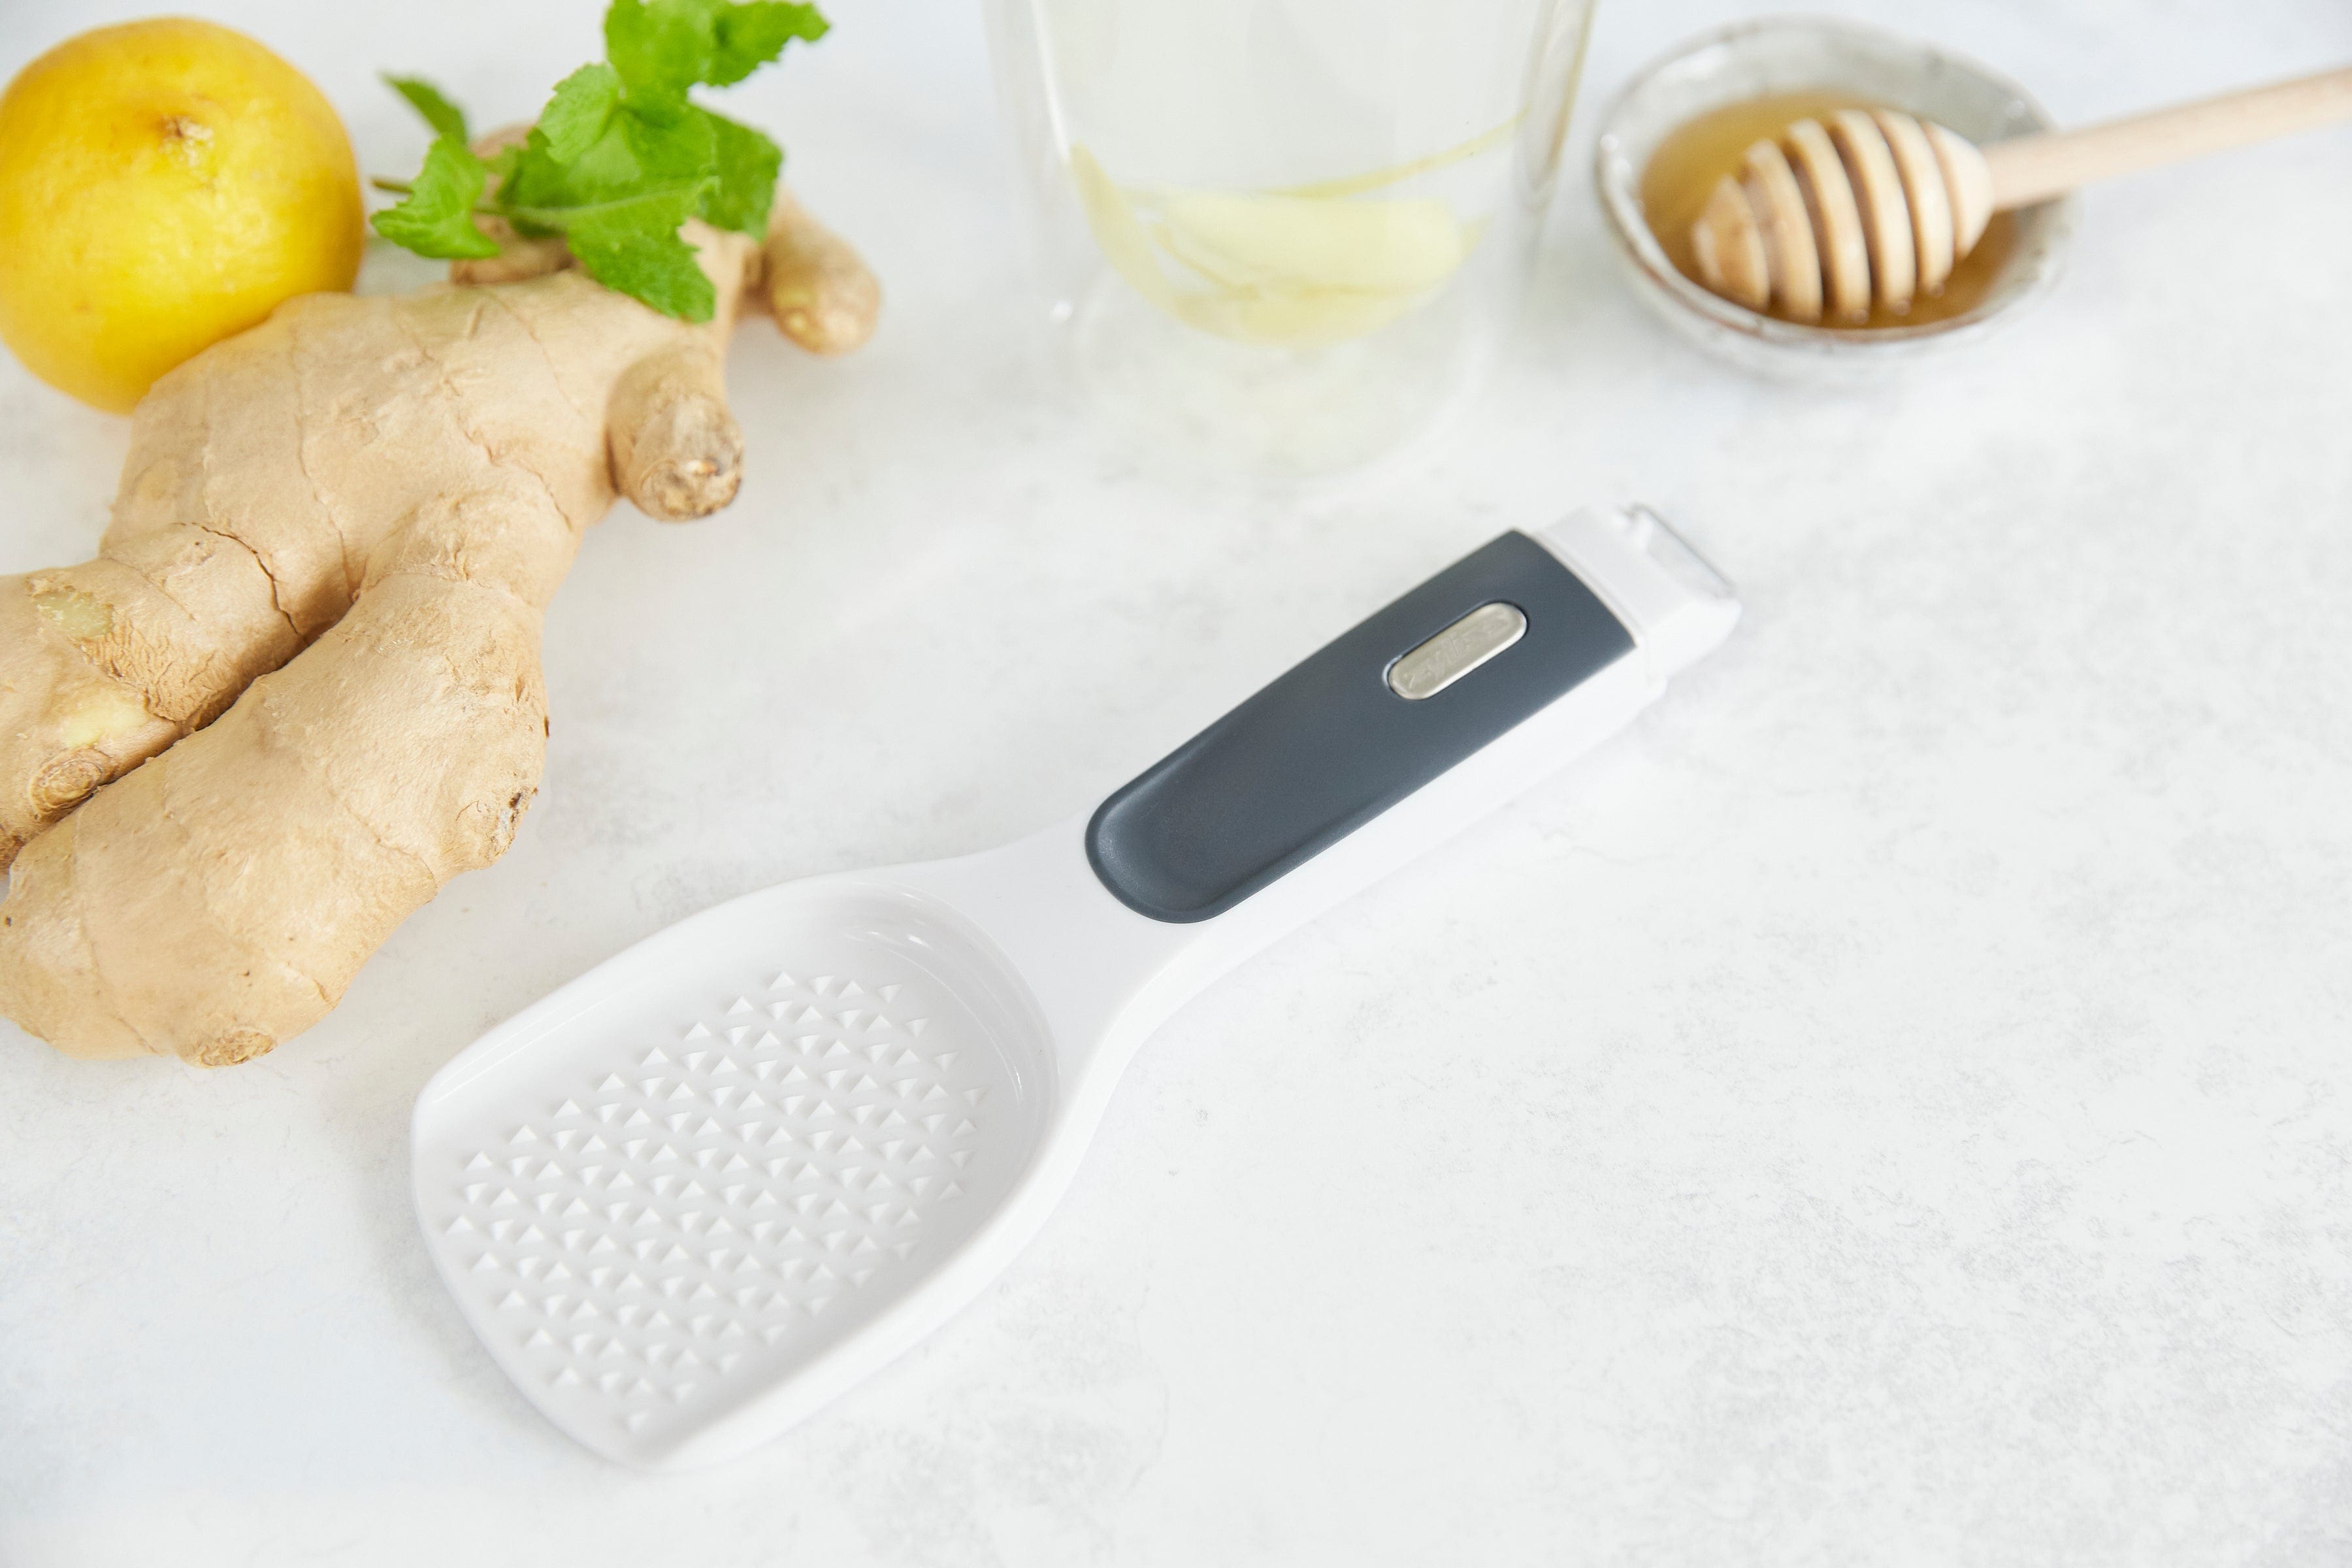 Peel & Grate Ginger Tool - Discontinued